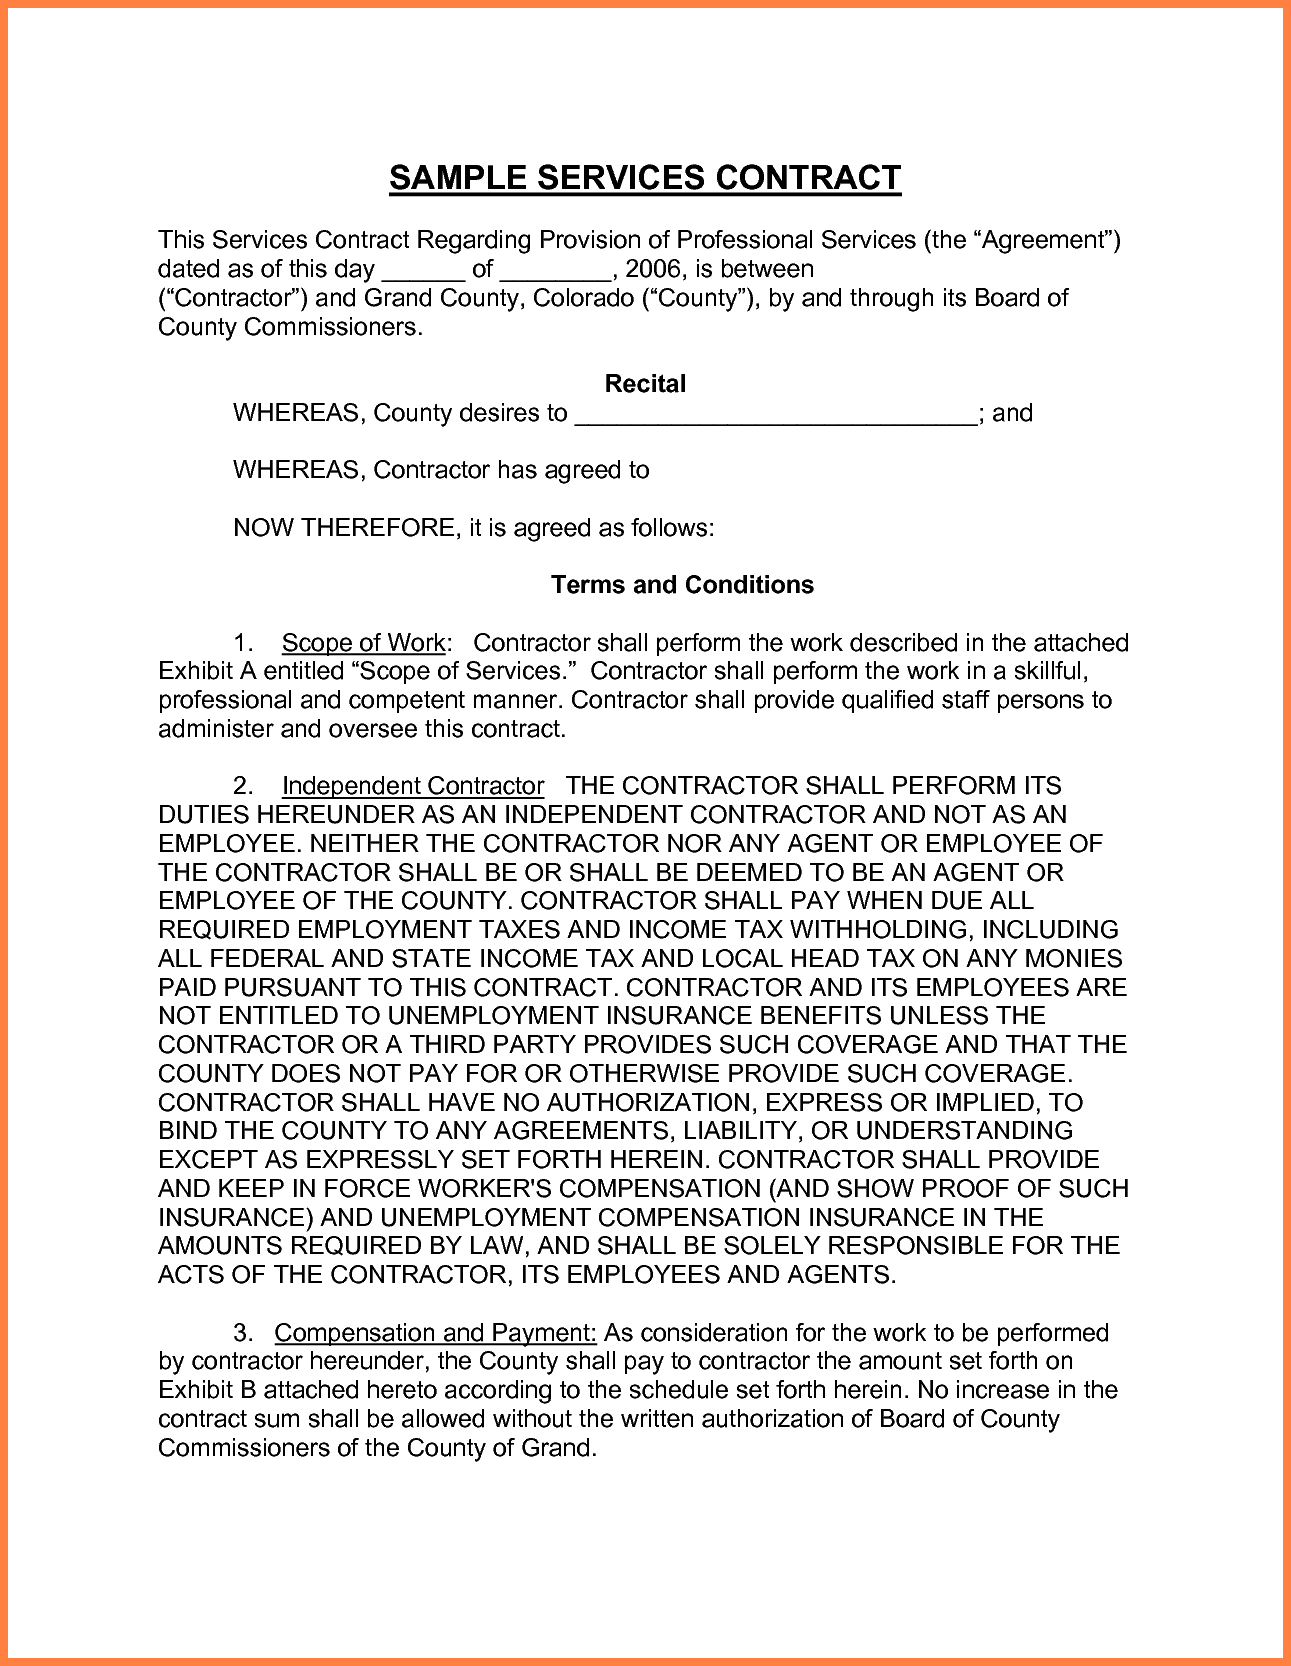 Professional Services Agreement 005 Template Ideas Professional Services Agreement Managed Service